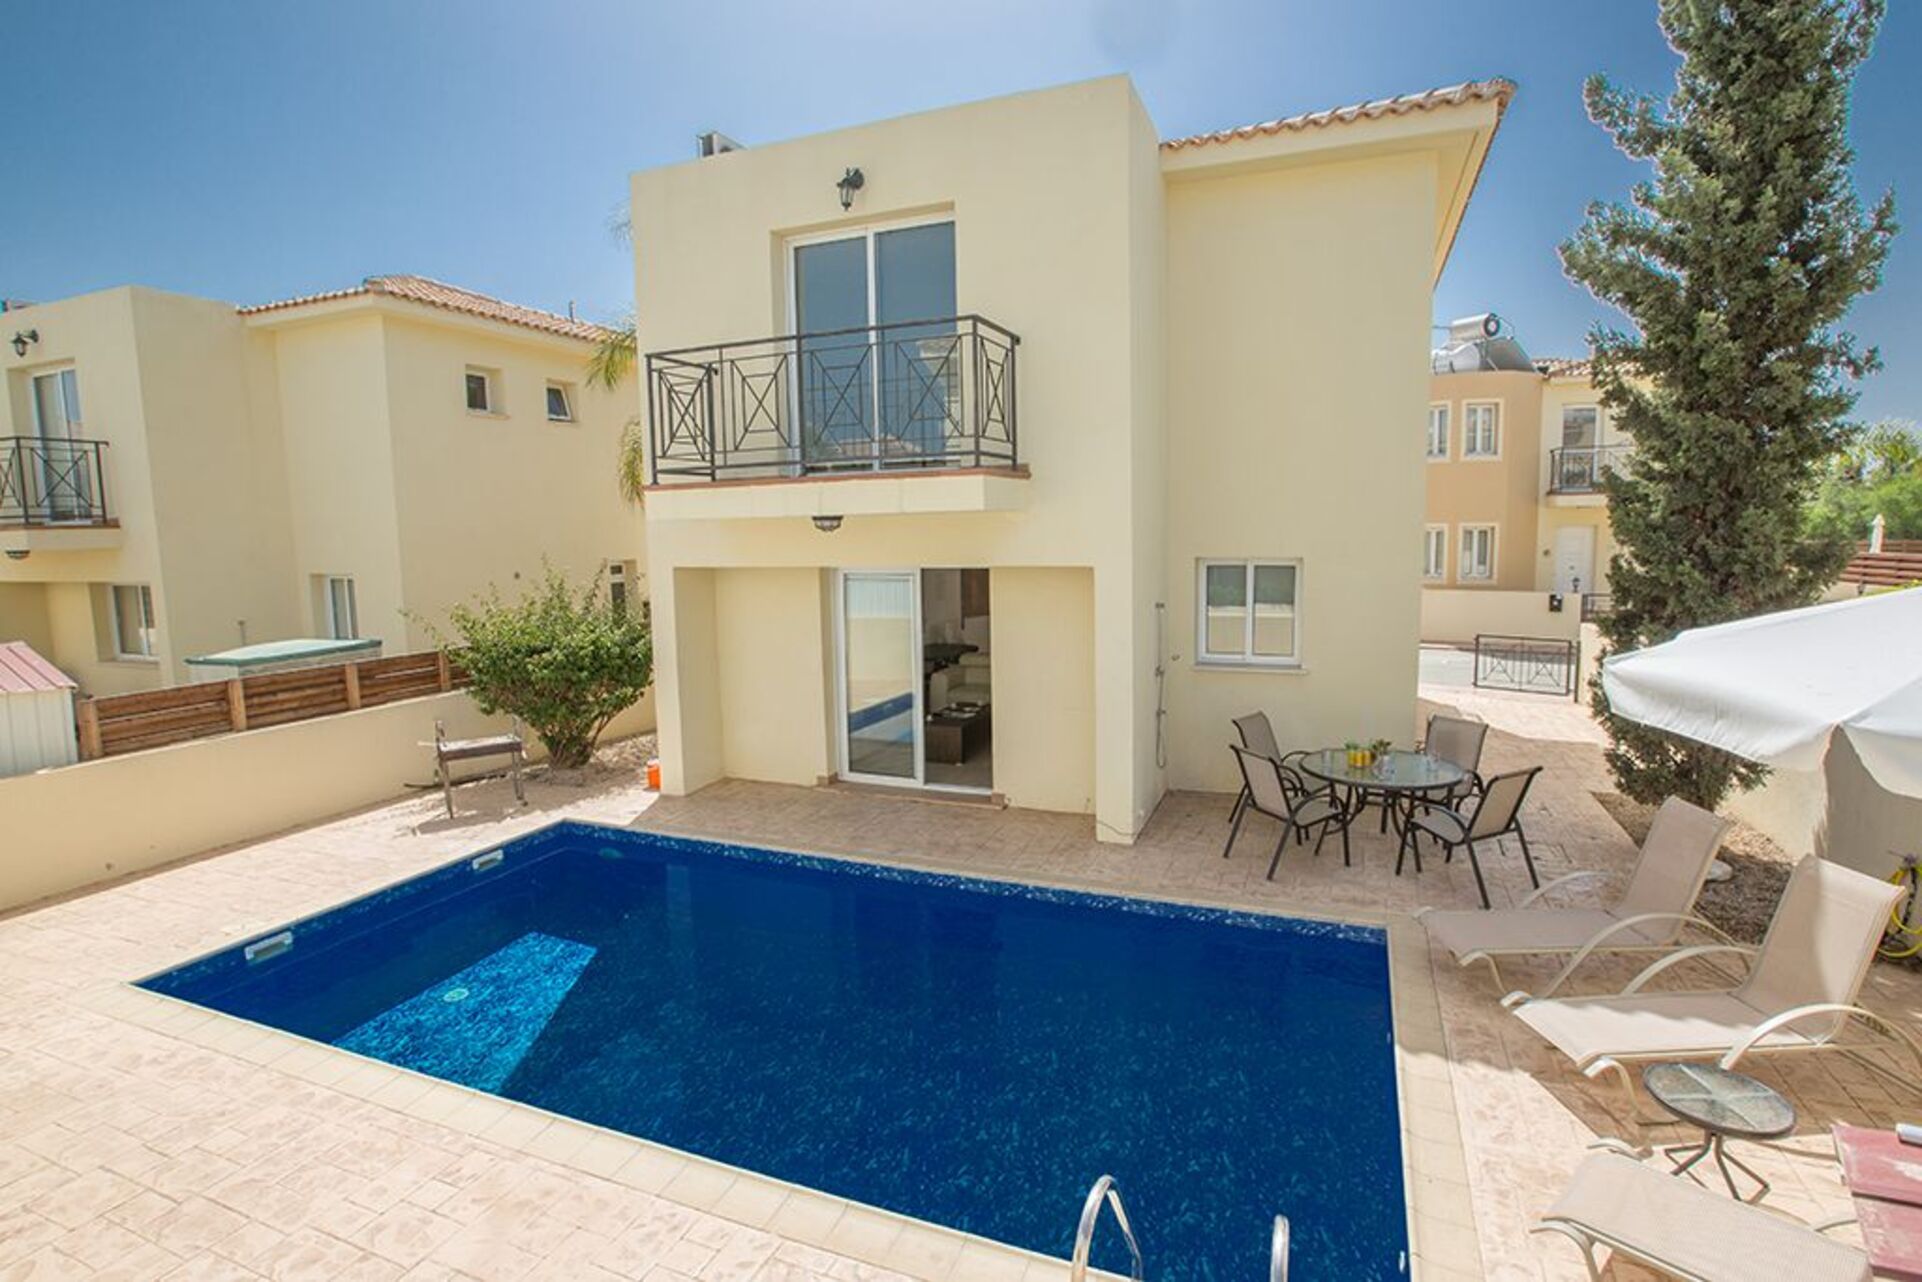 Property Image 1 - Picture This, Enjoying Your Holiday in a Luxury Villa in Protaras,For Less Than a Hotel, Paralimni Villa 1